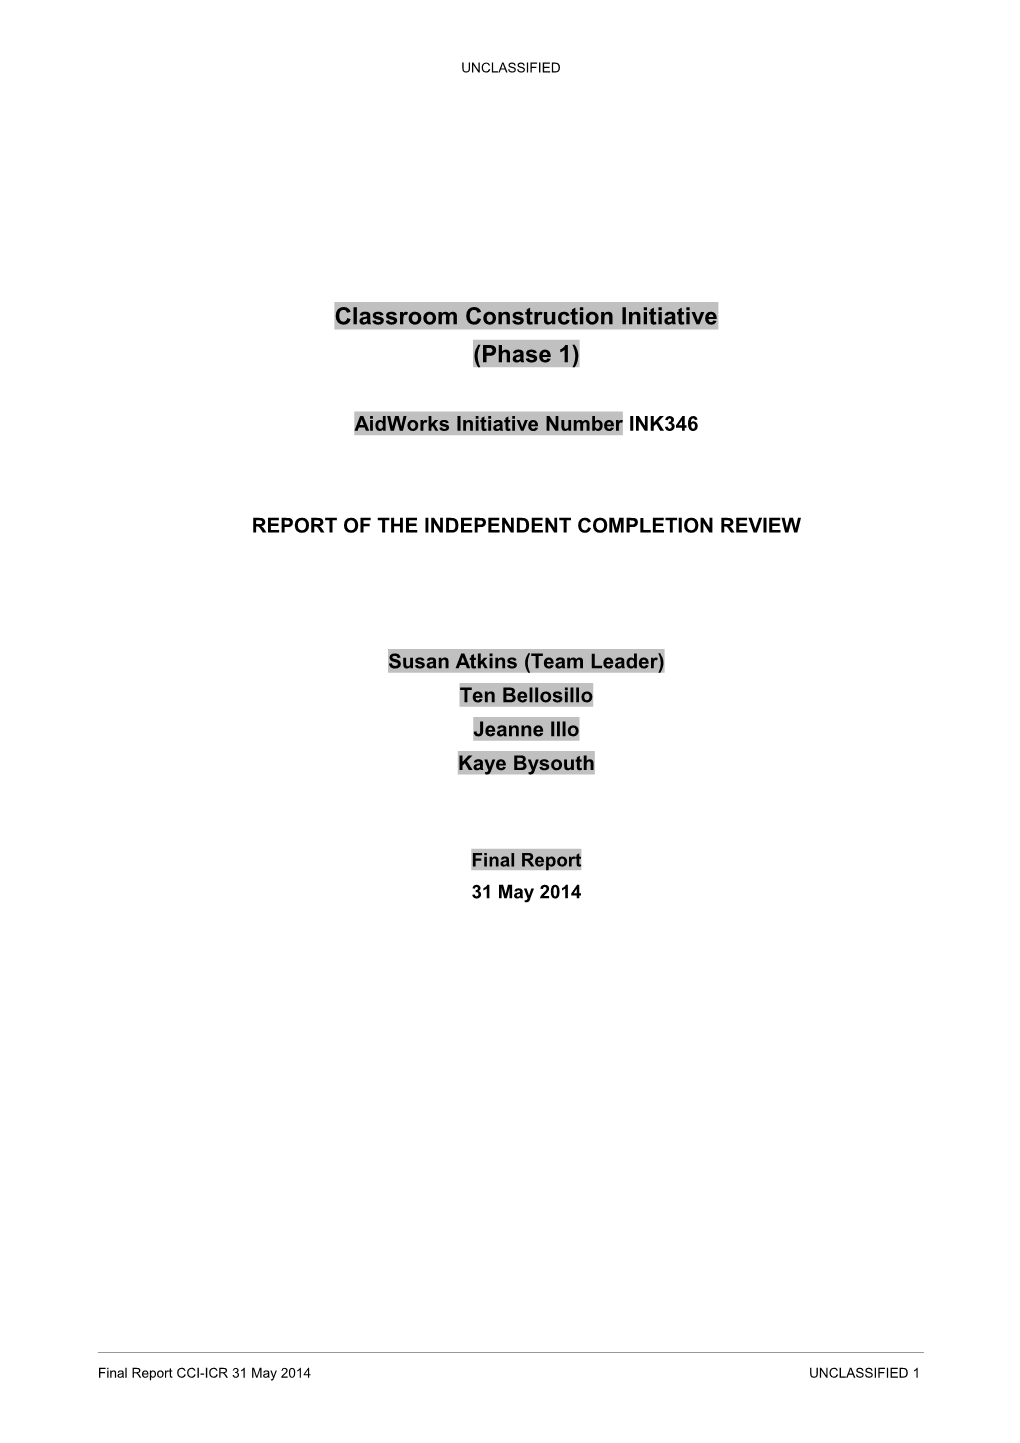 Report of the Independent Completion Review